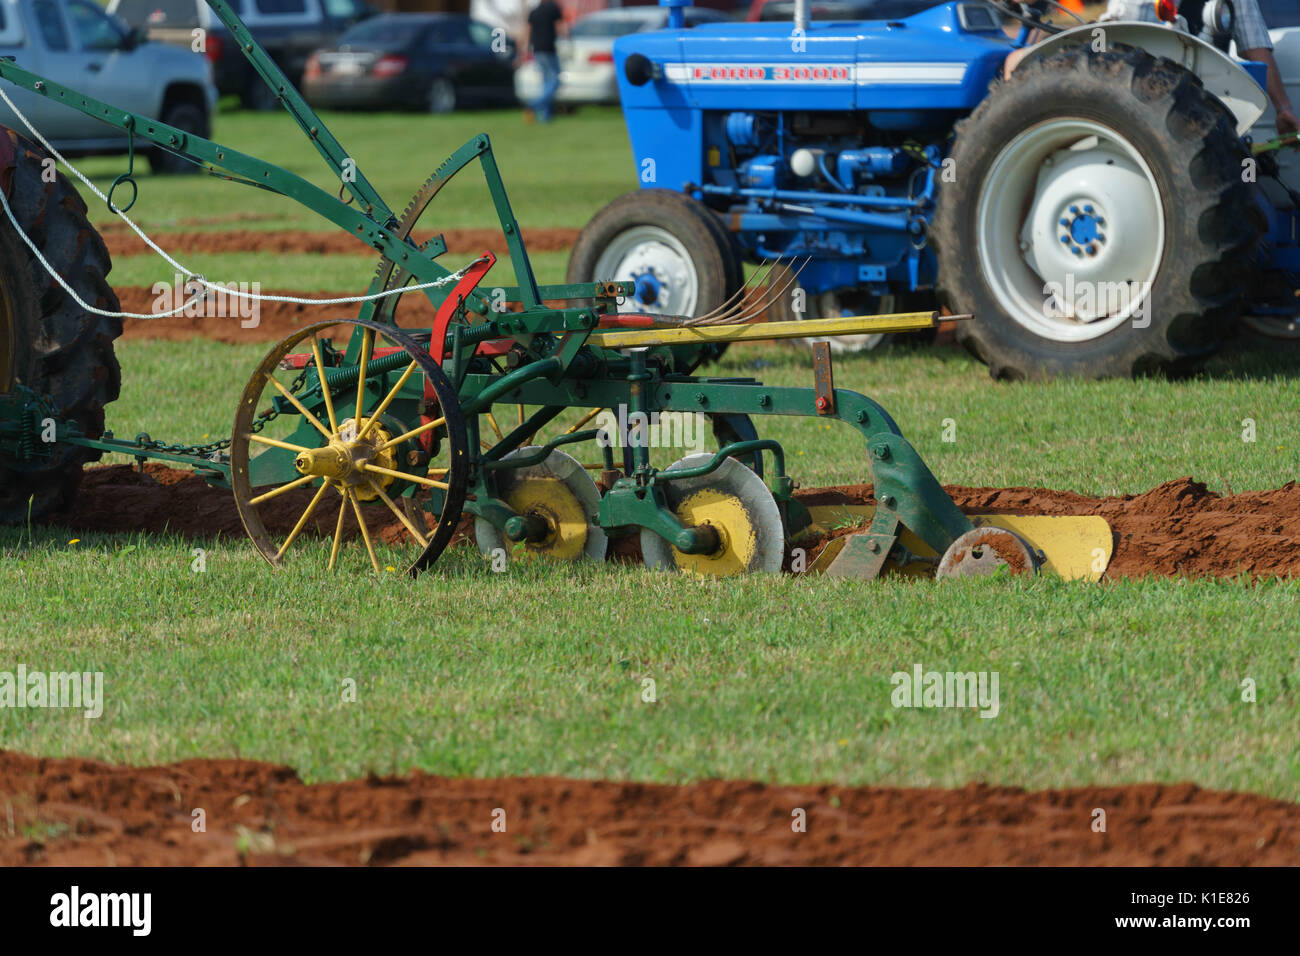 DUNDAS, PRINCE EDWARD ISLAND, CANADA - 25 Aug: Competitors plow with antique tractors at the PEI Plowing Match and Agricultural fair on August 25, 201 Stock Photo